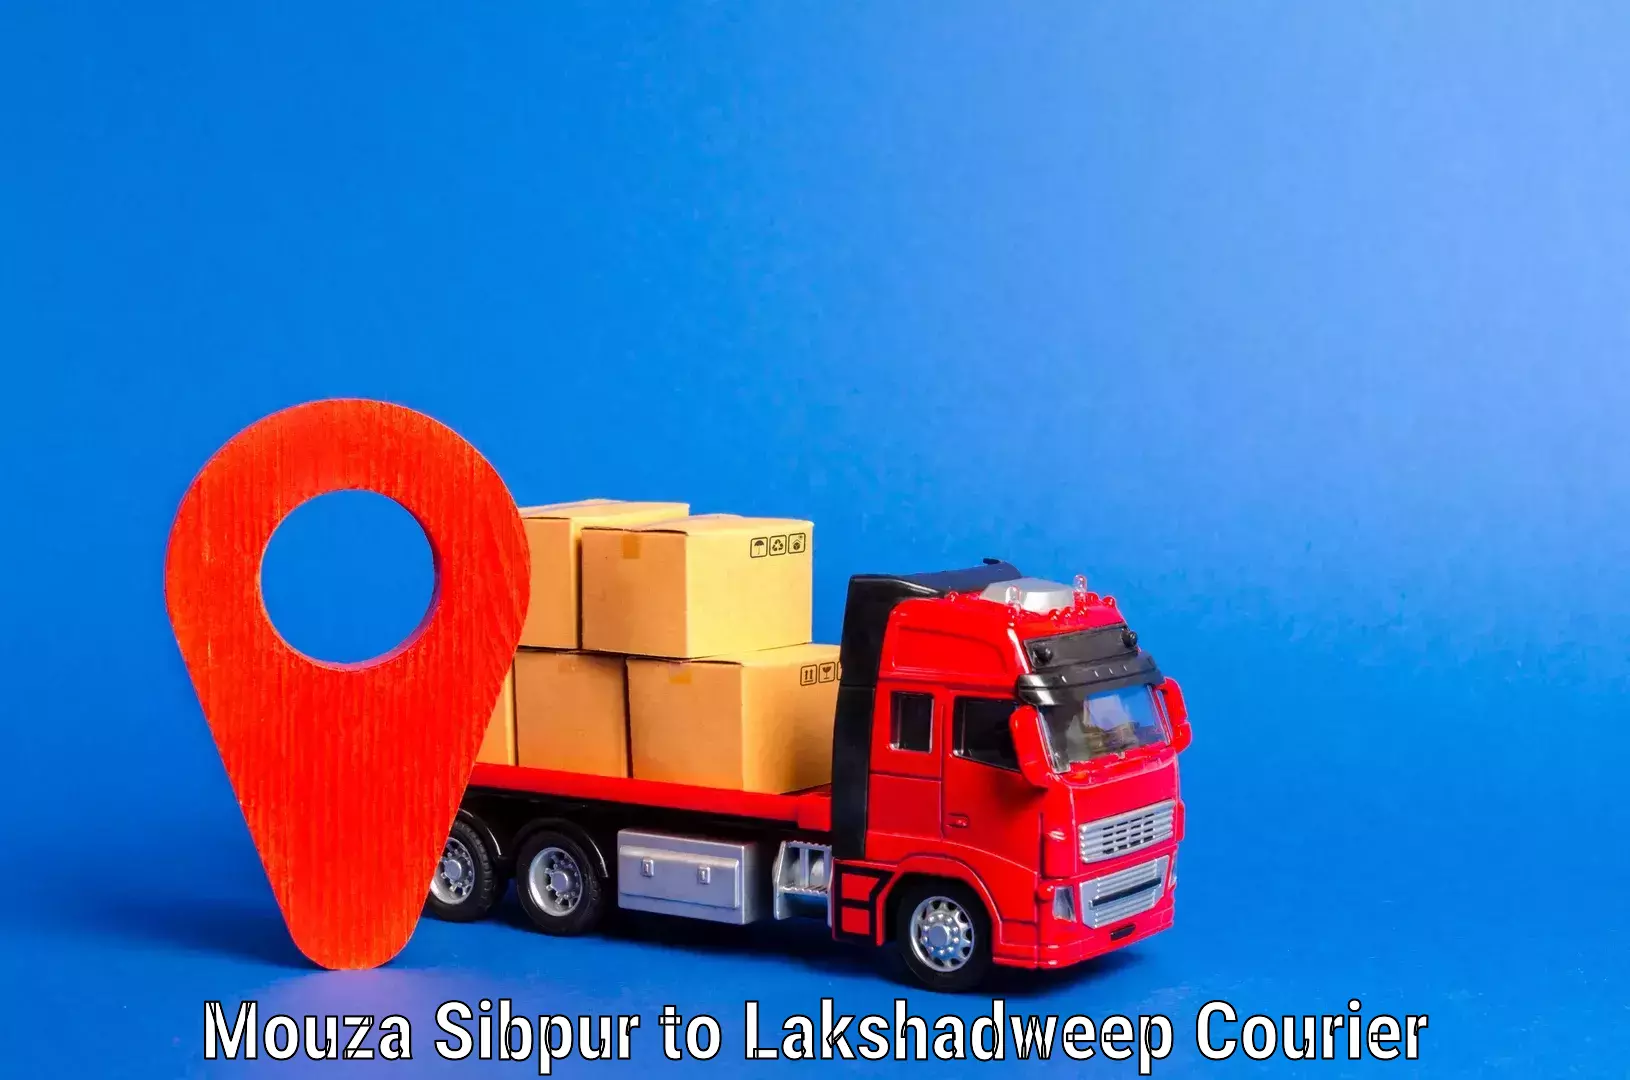 Household goods transport service Mouza Sibpur to Lakshadweep